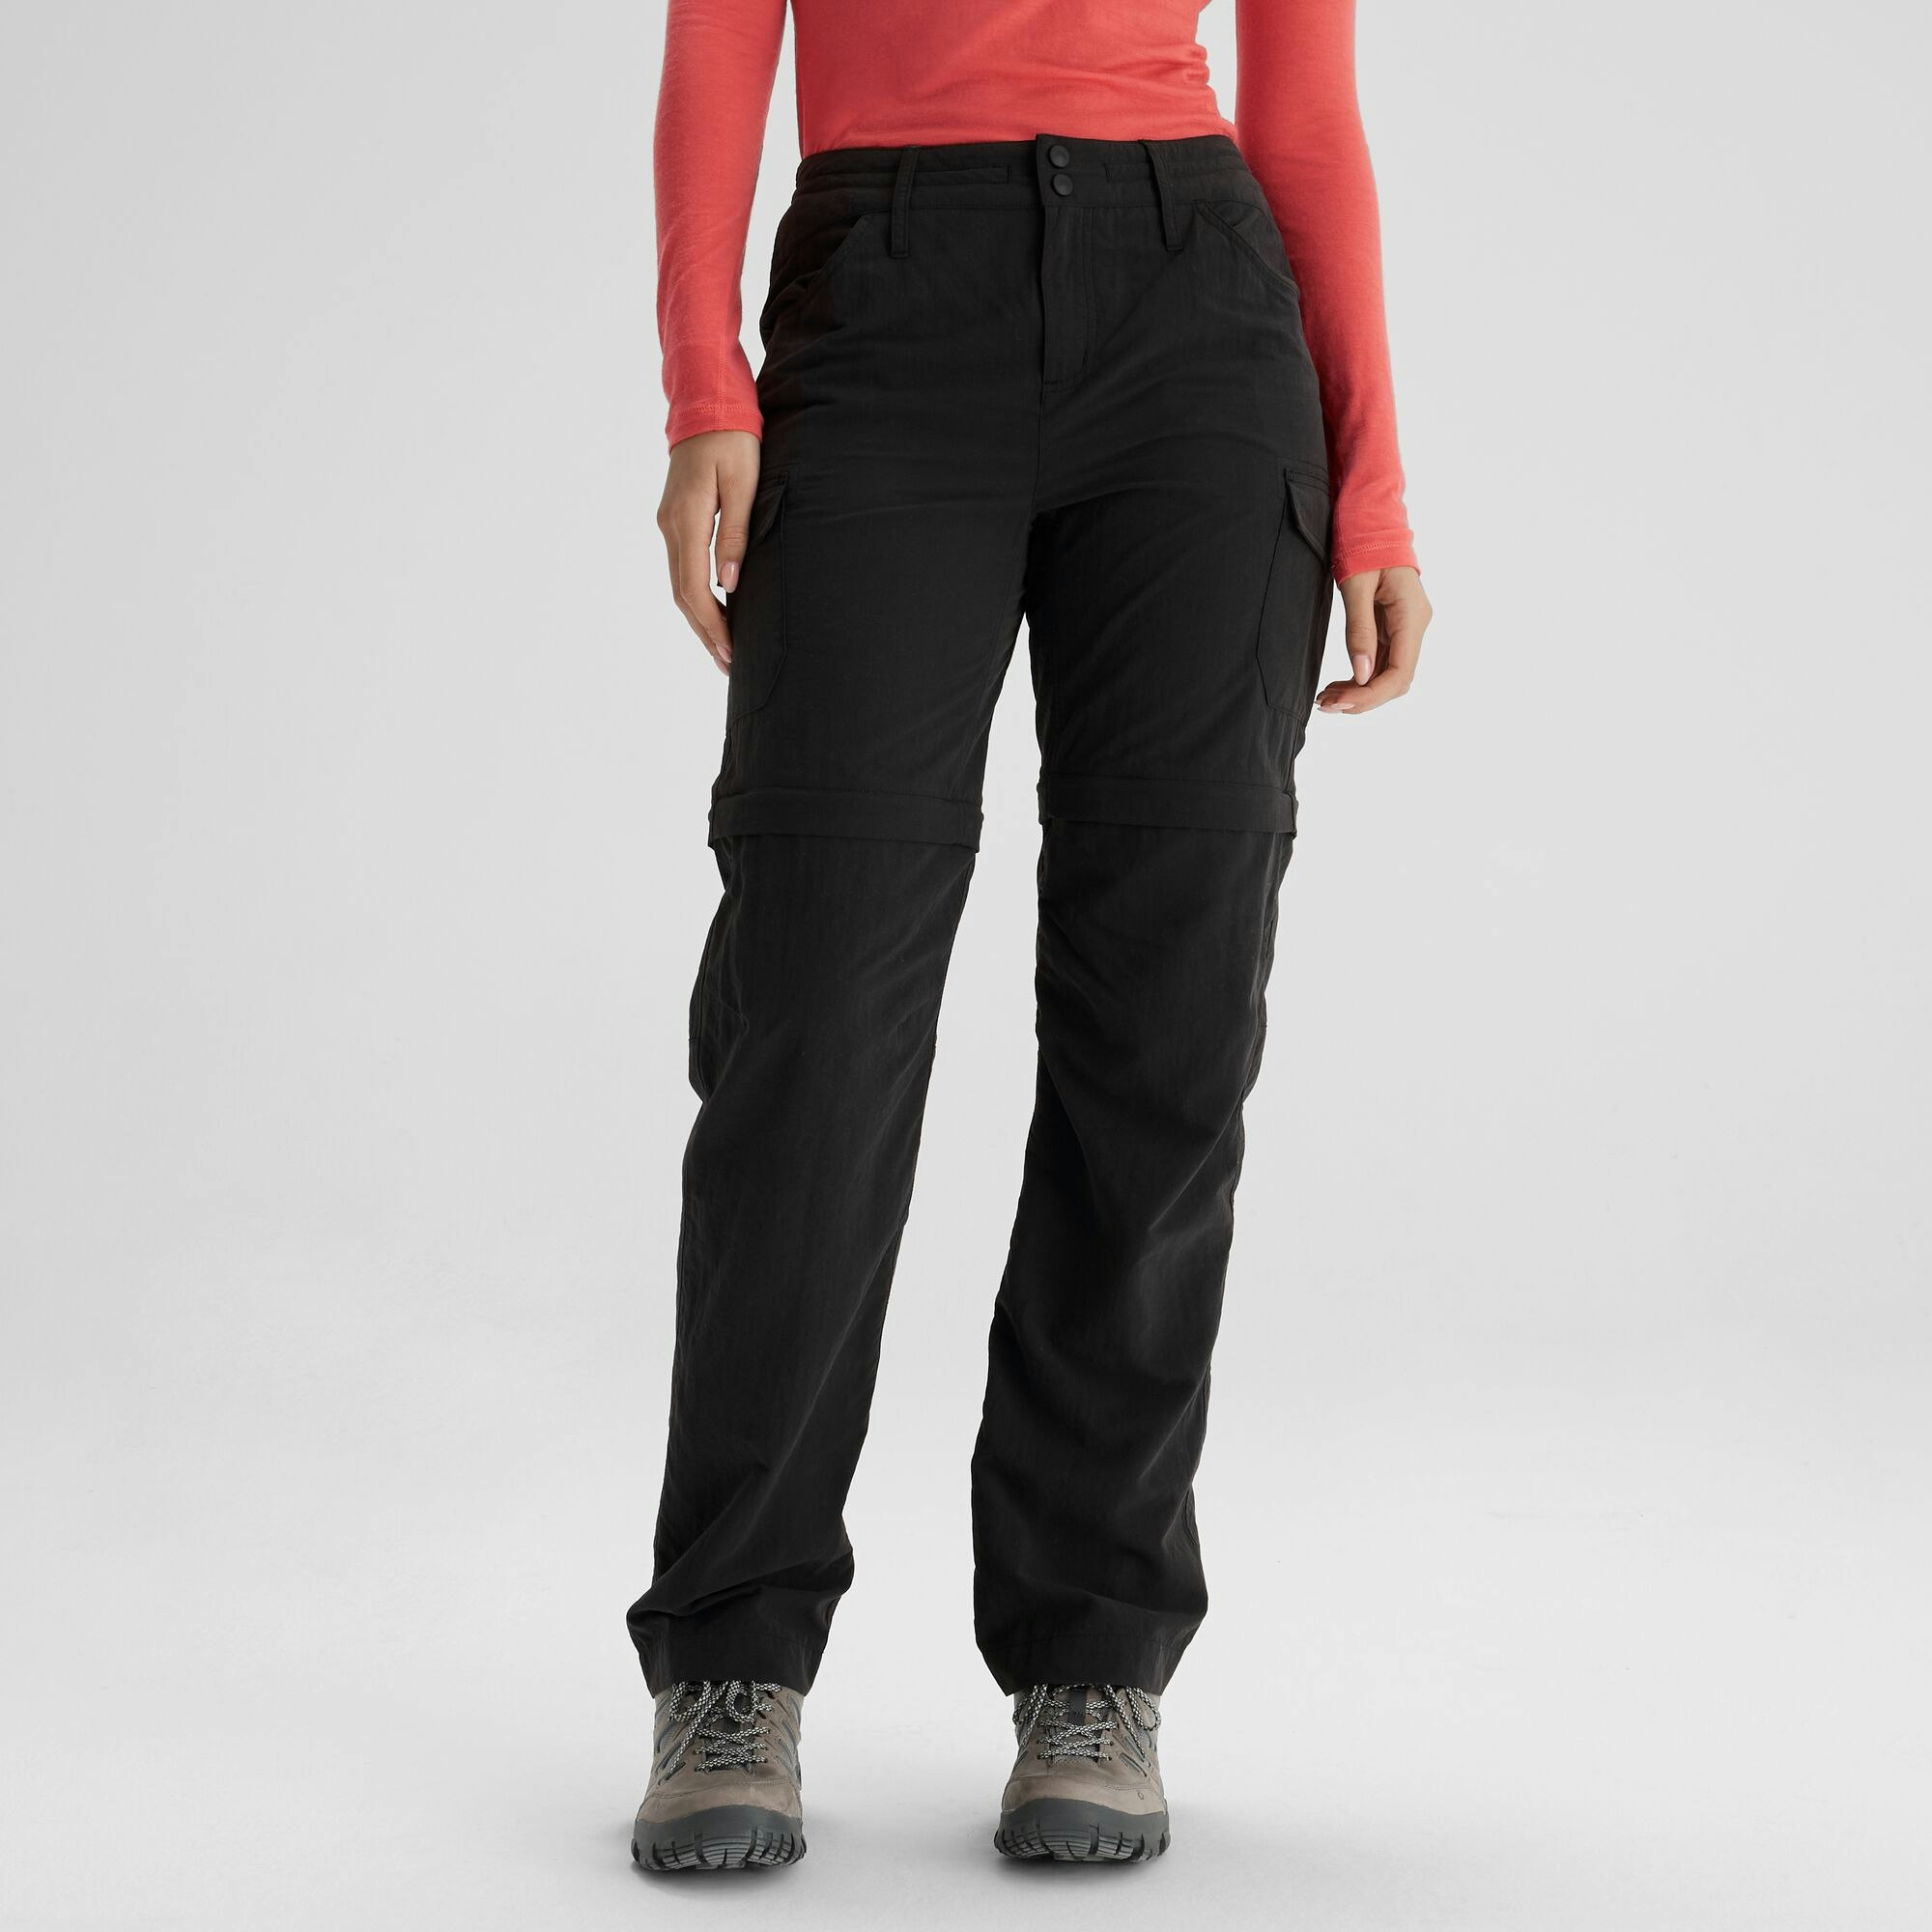 EVRY-Day Women's Convertible Pants